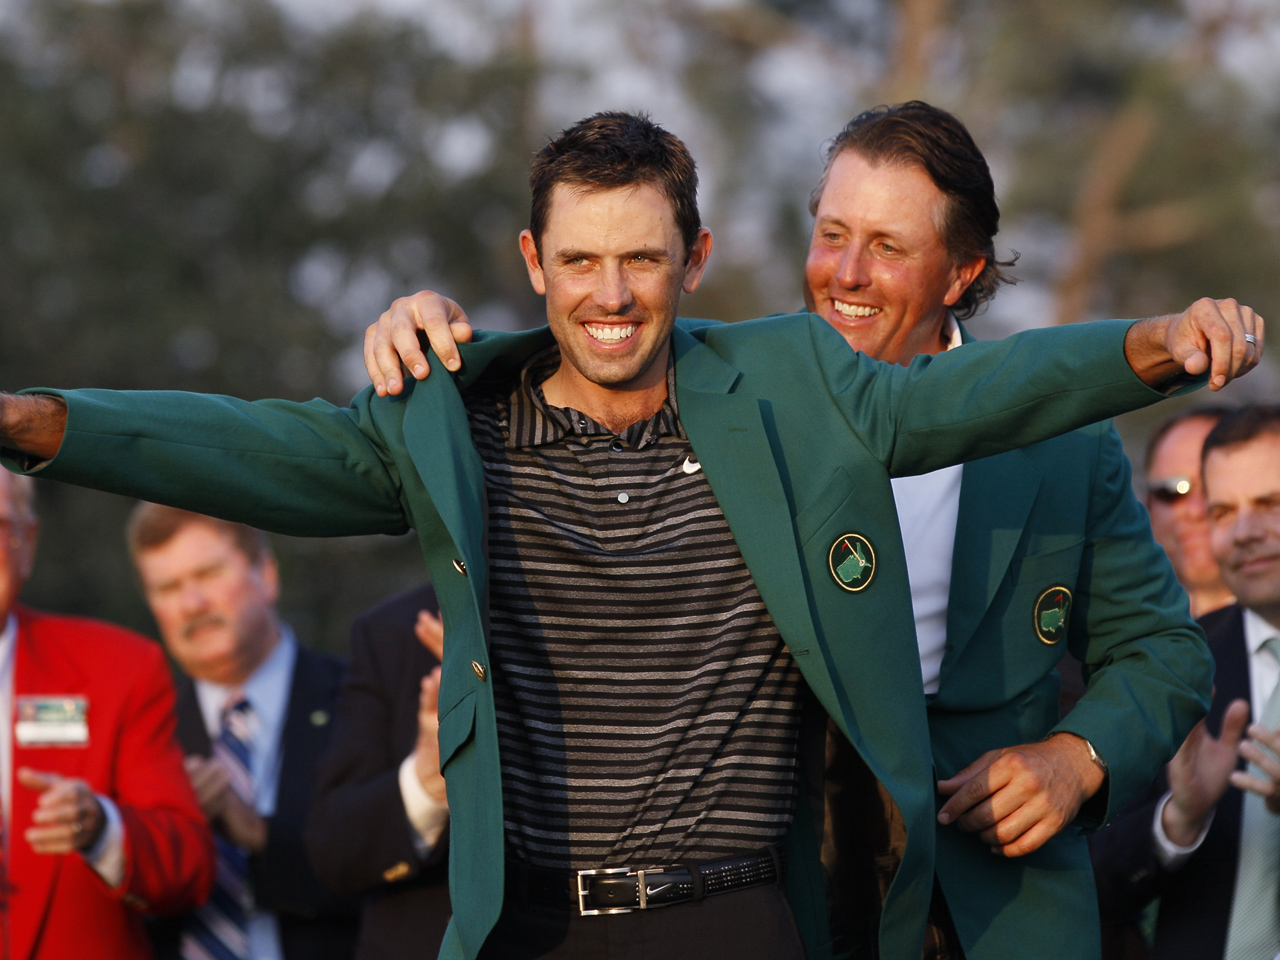 2011 Masters Tournament - Photo 1 - Pictures - CBS News